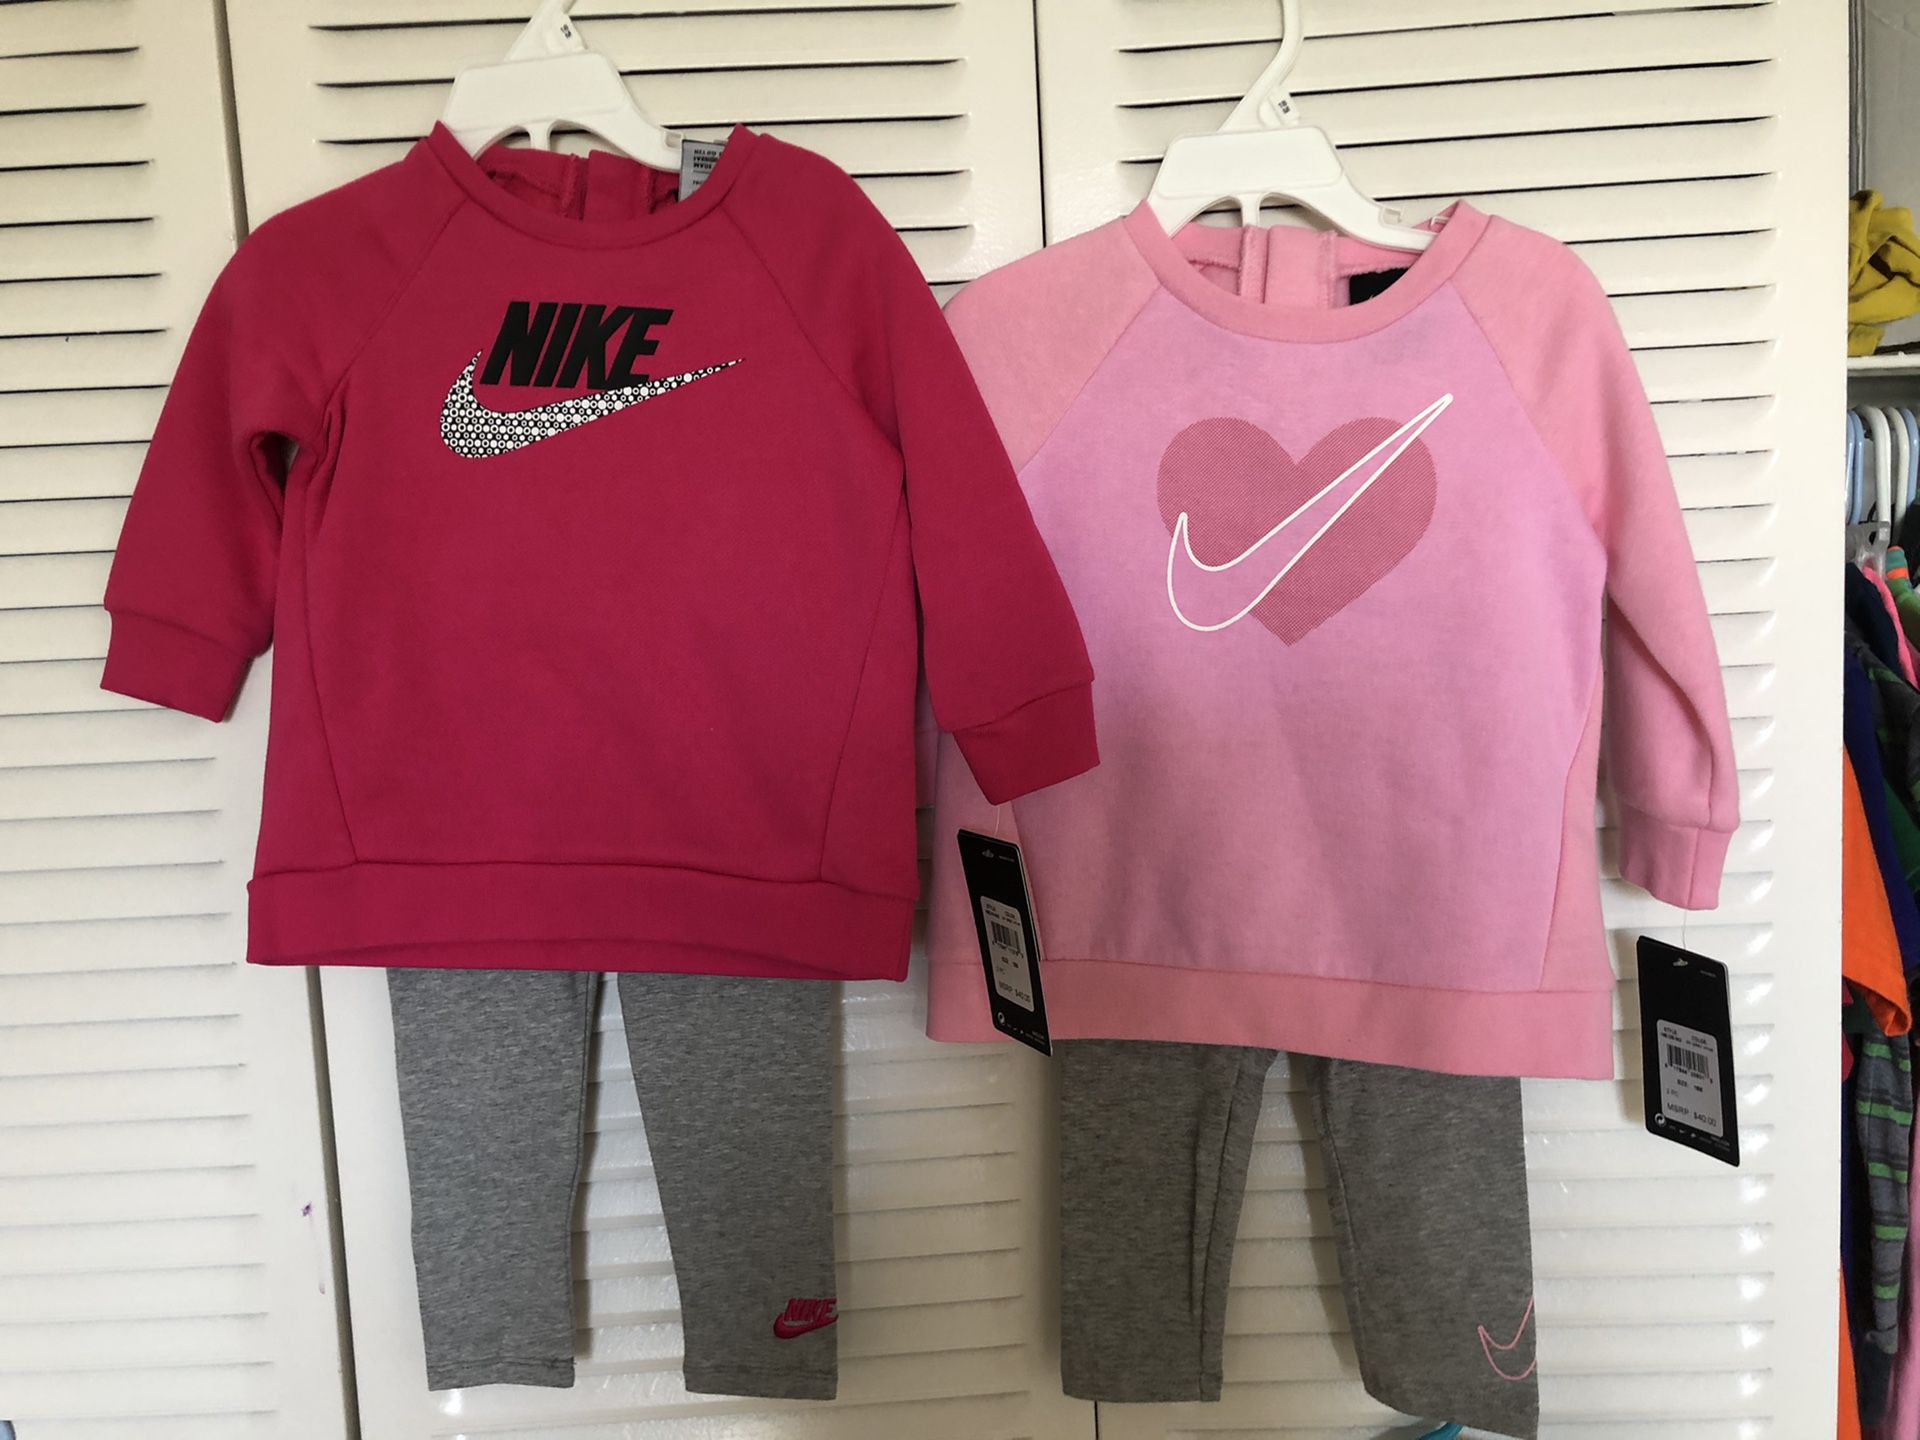 Nike toddler girls outfit size 18 months